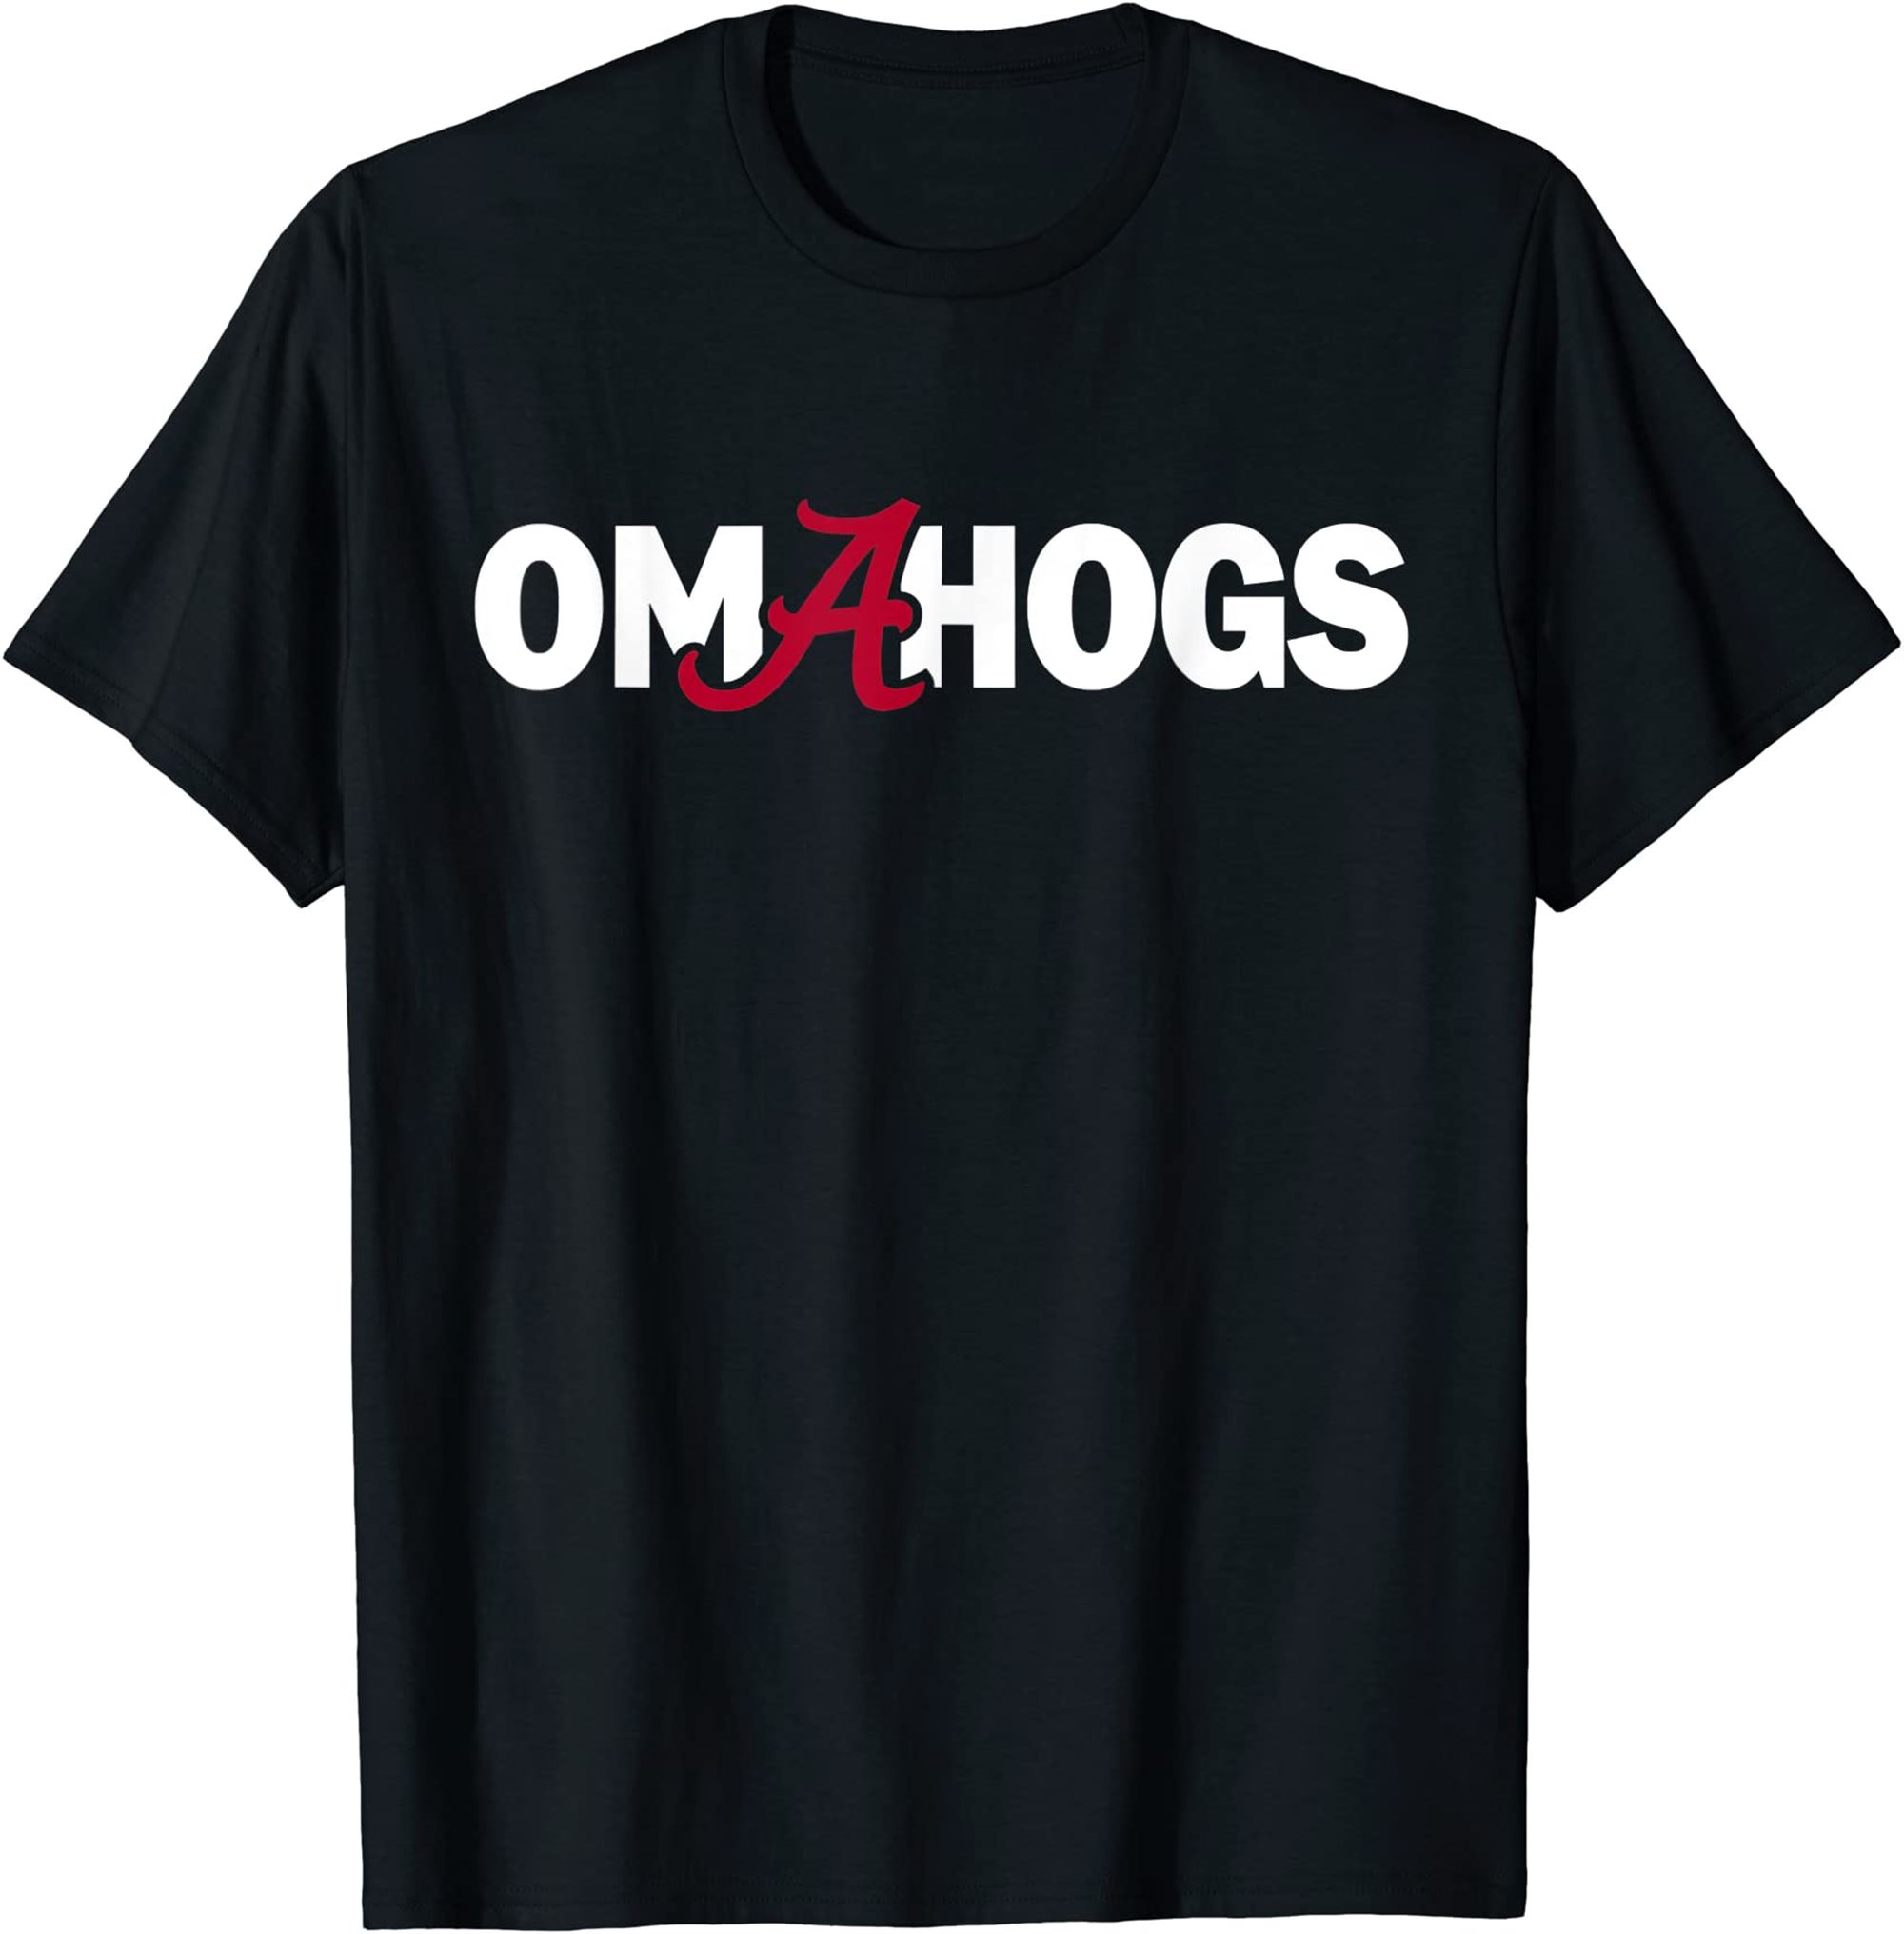 Omaha Here Come The Hogs Funny Omahogs T-shirt Plus Size Up To 5xl